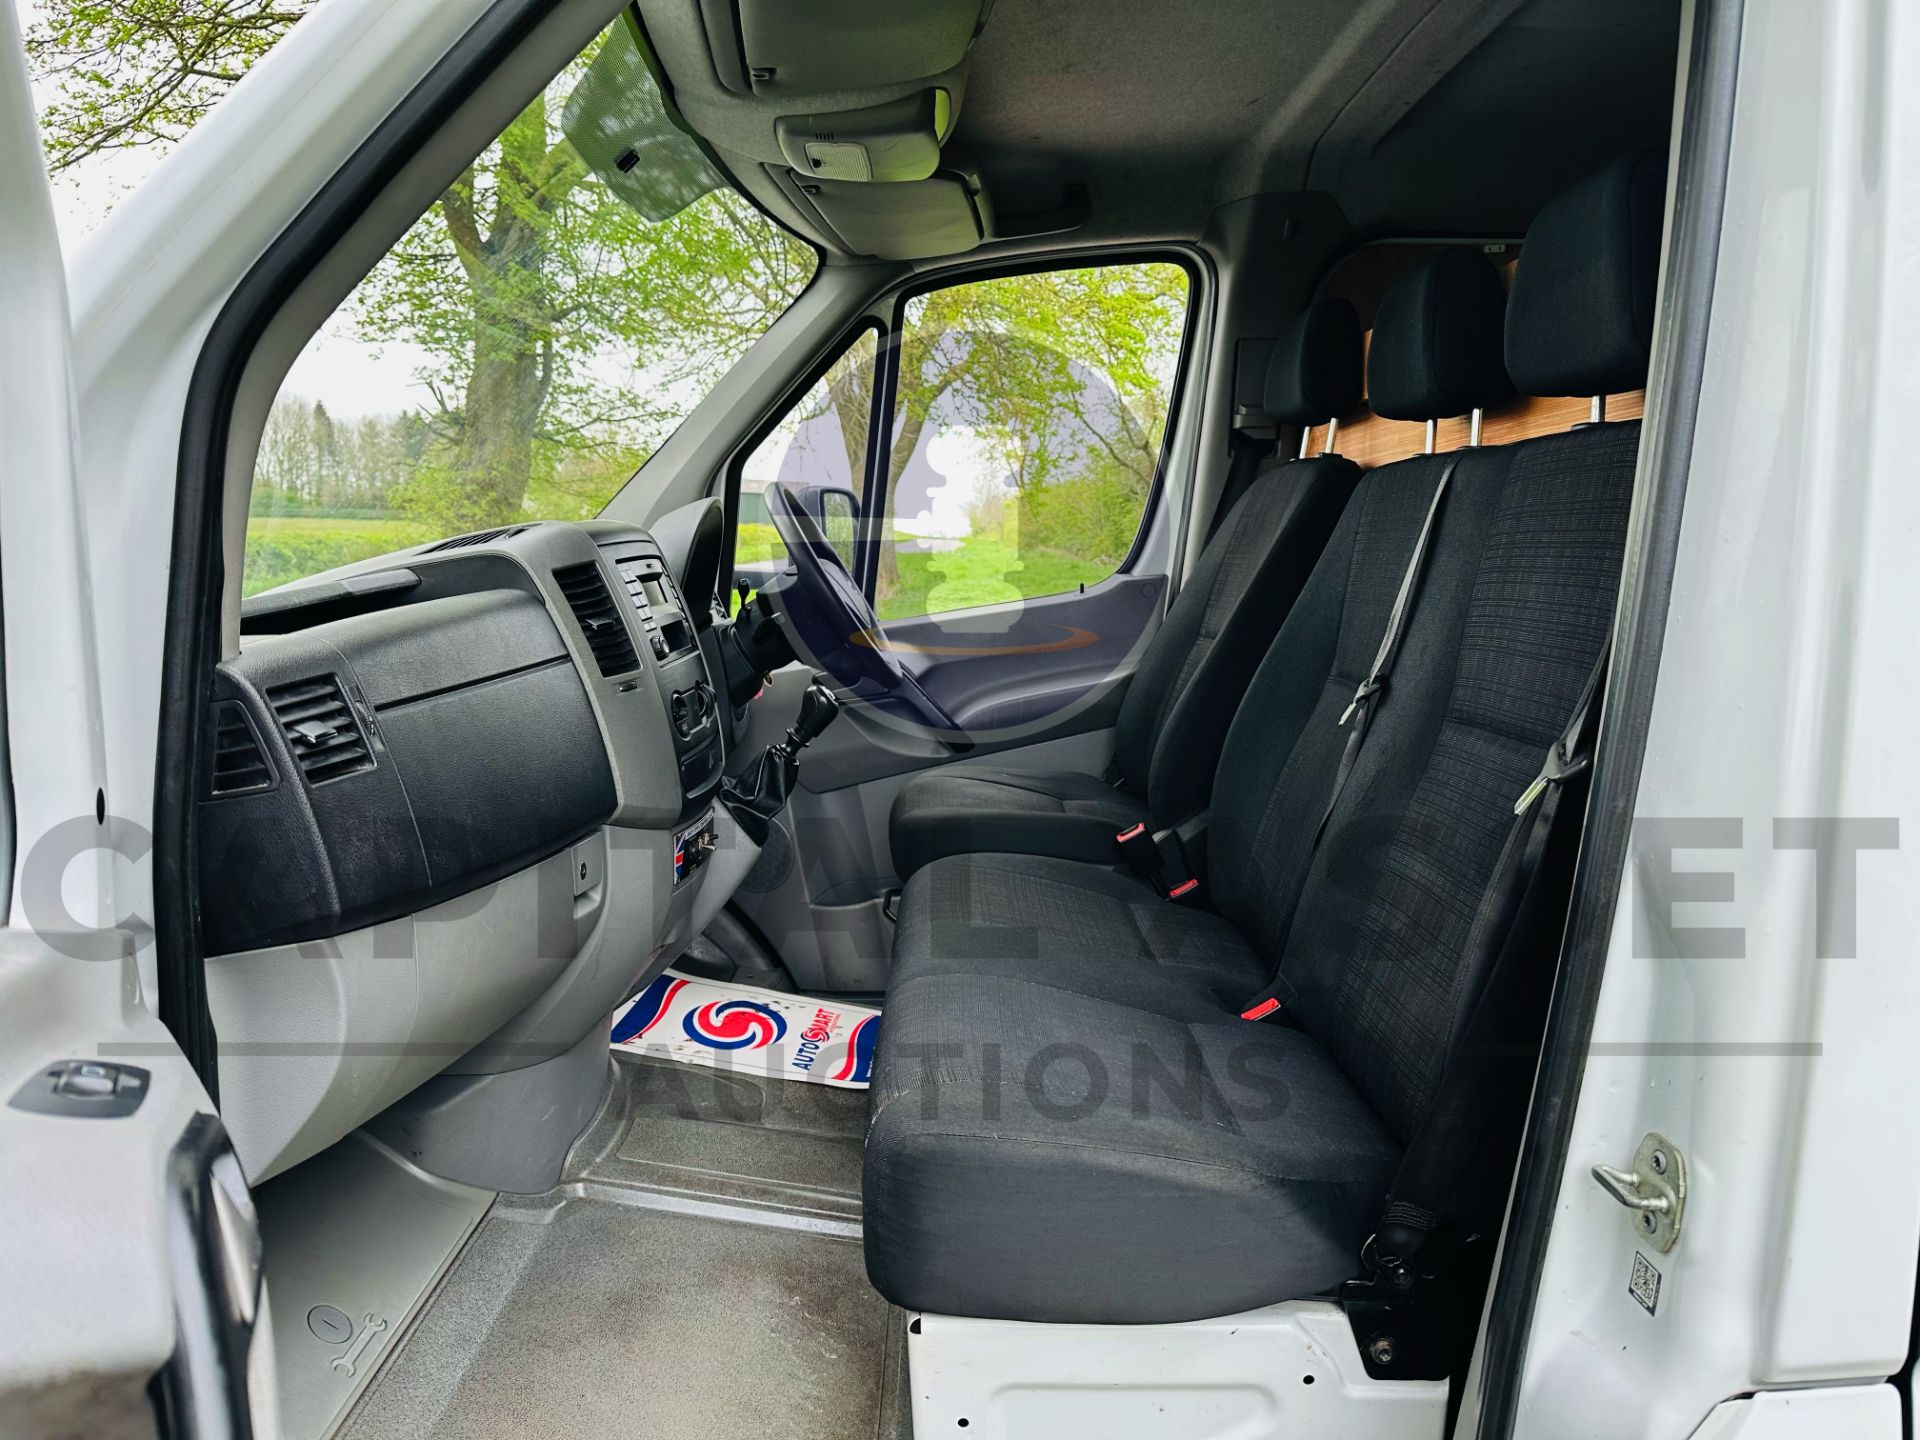 (ON SALE) MERCEDES SPRINTER 314 CDI *DOUBLE CAB TIPPER TRUCK* BLUETEC EDITION - 2019 MODEL 35K MILES - Image 15 of 31